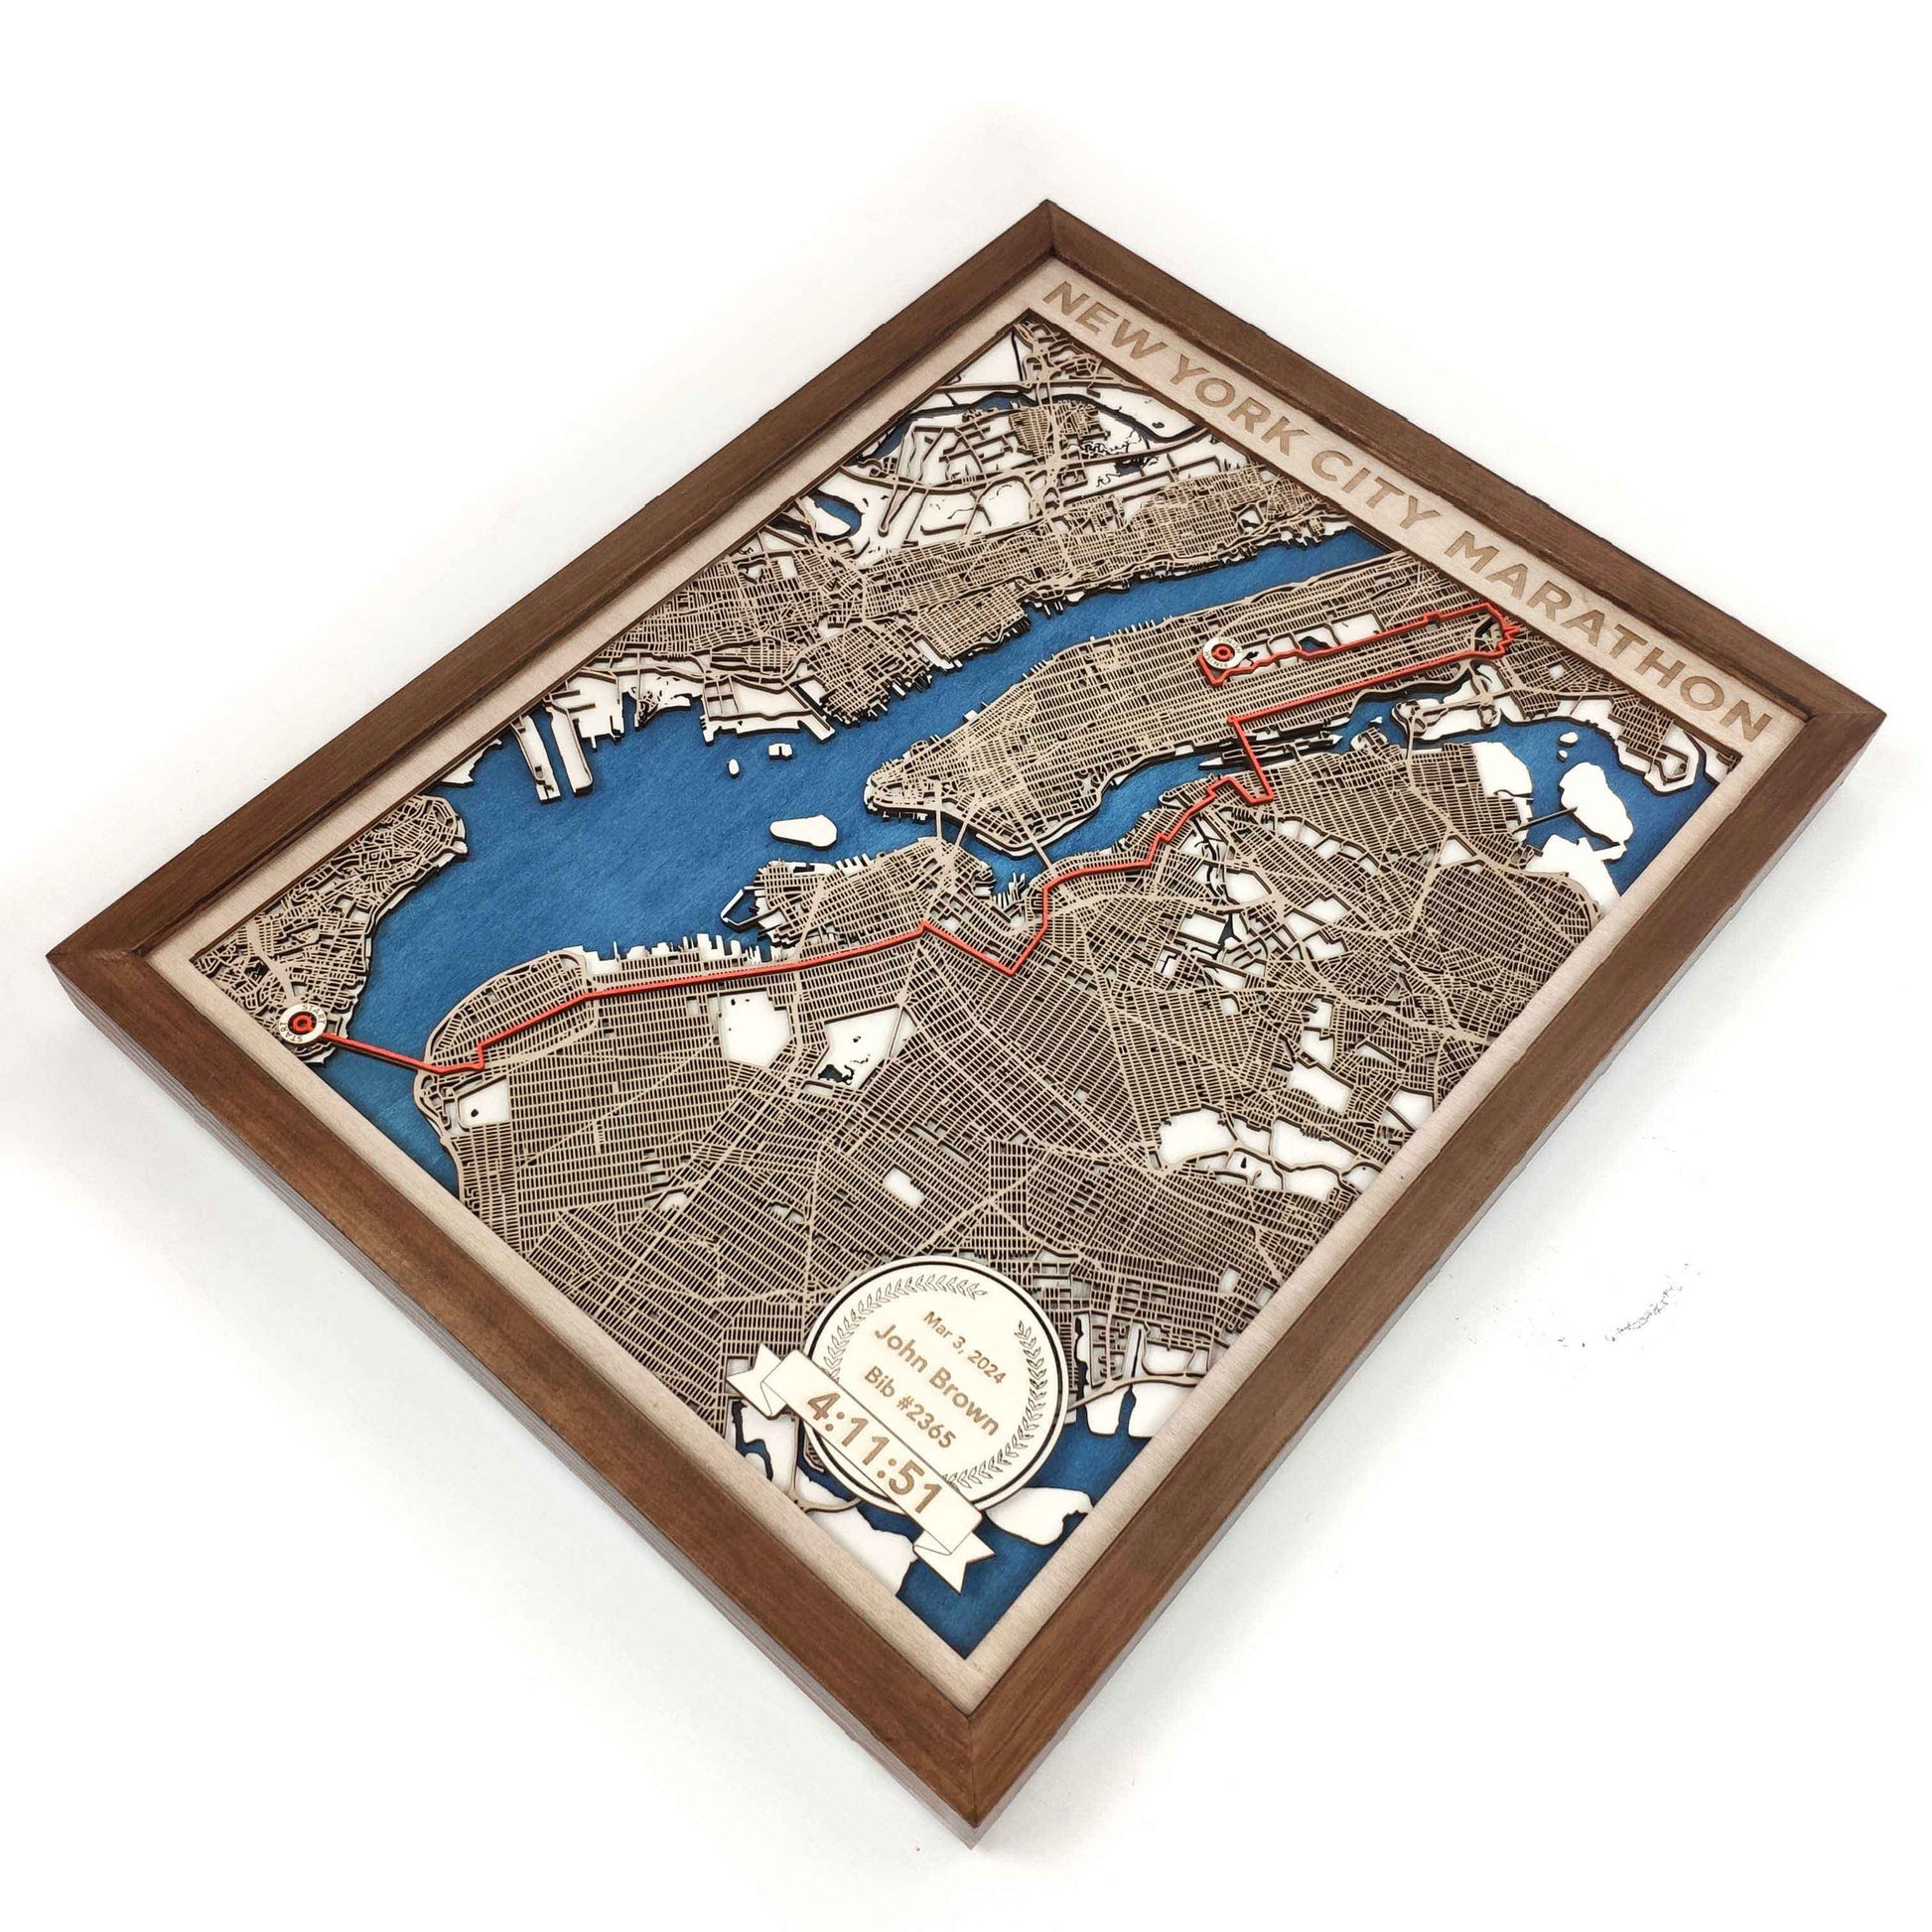 New York City Marathon Commemorative Wooden Route Map – Collector's Item by CityWood - Custom Wood Map Art - Unique Laser Cut Engraved - Anniversary Gift